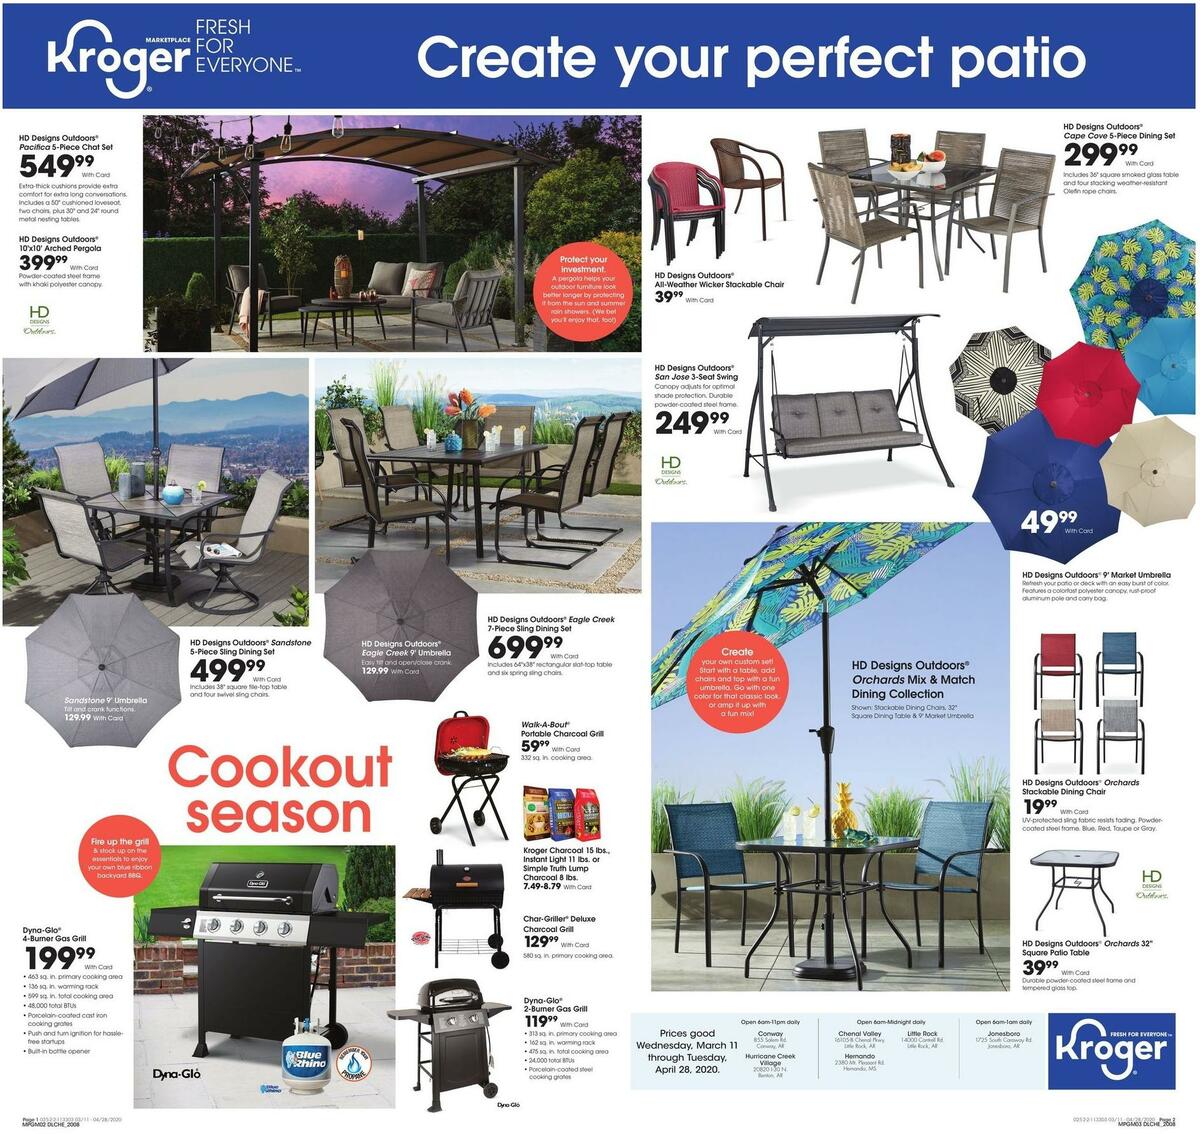 Kroger Outdoor Living Weekly Ads & Special Buys from March 11